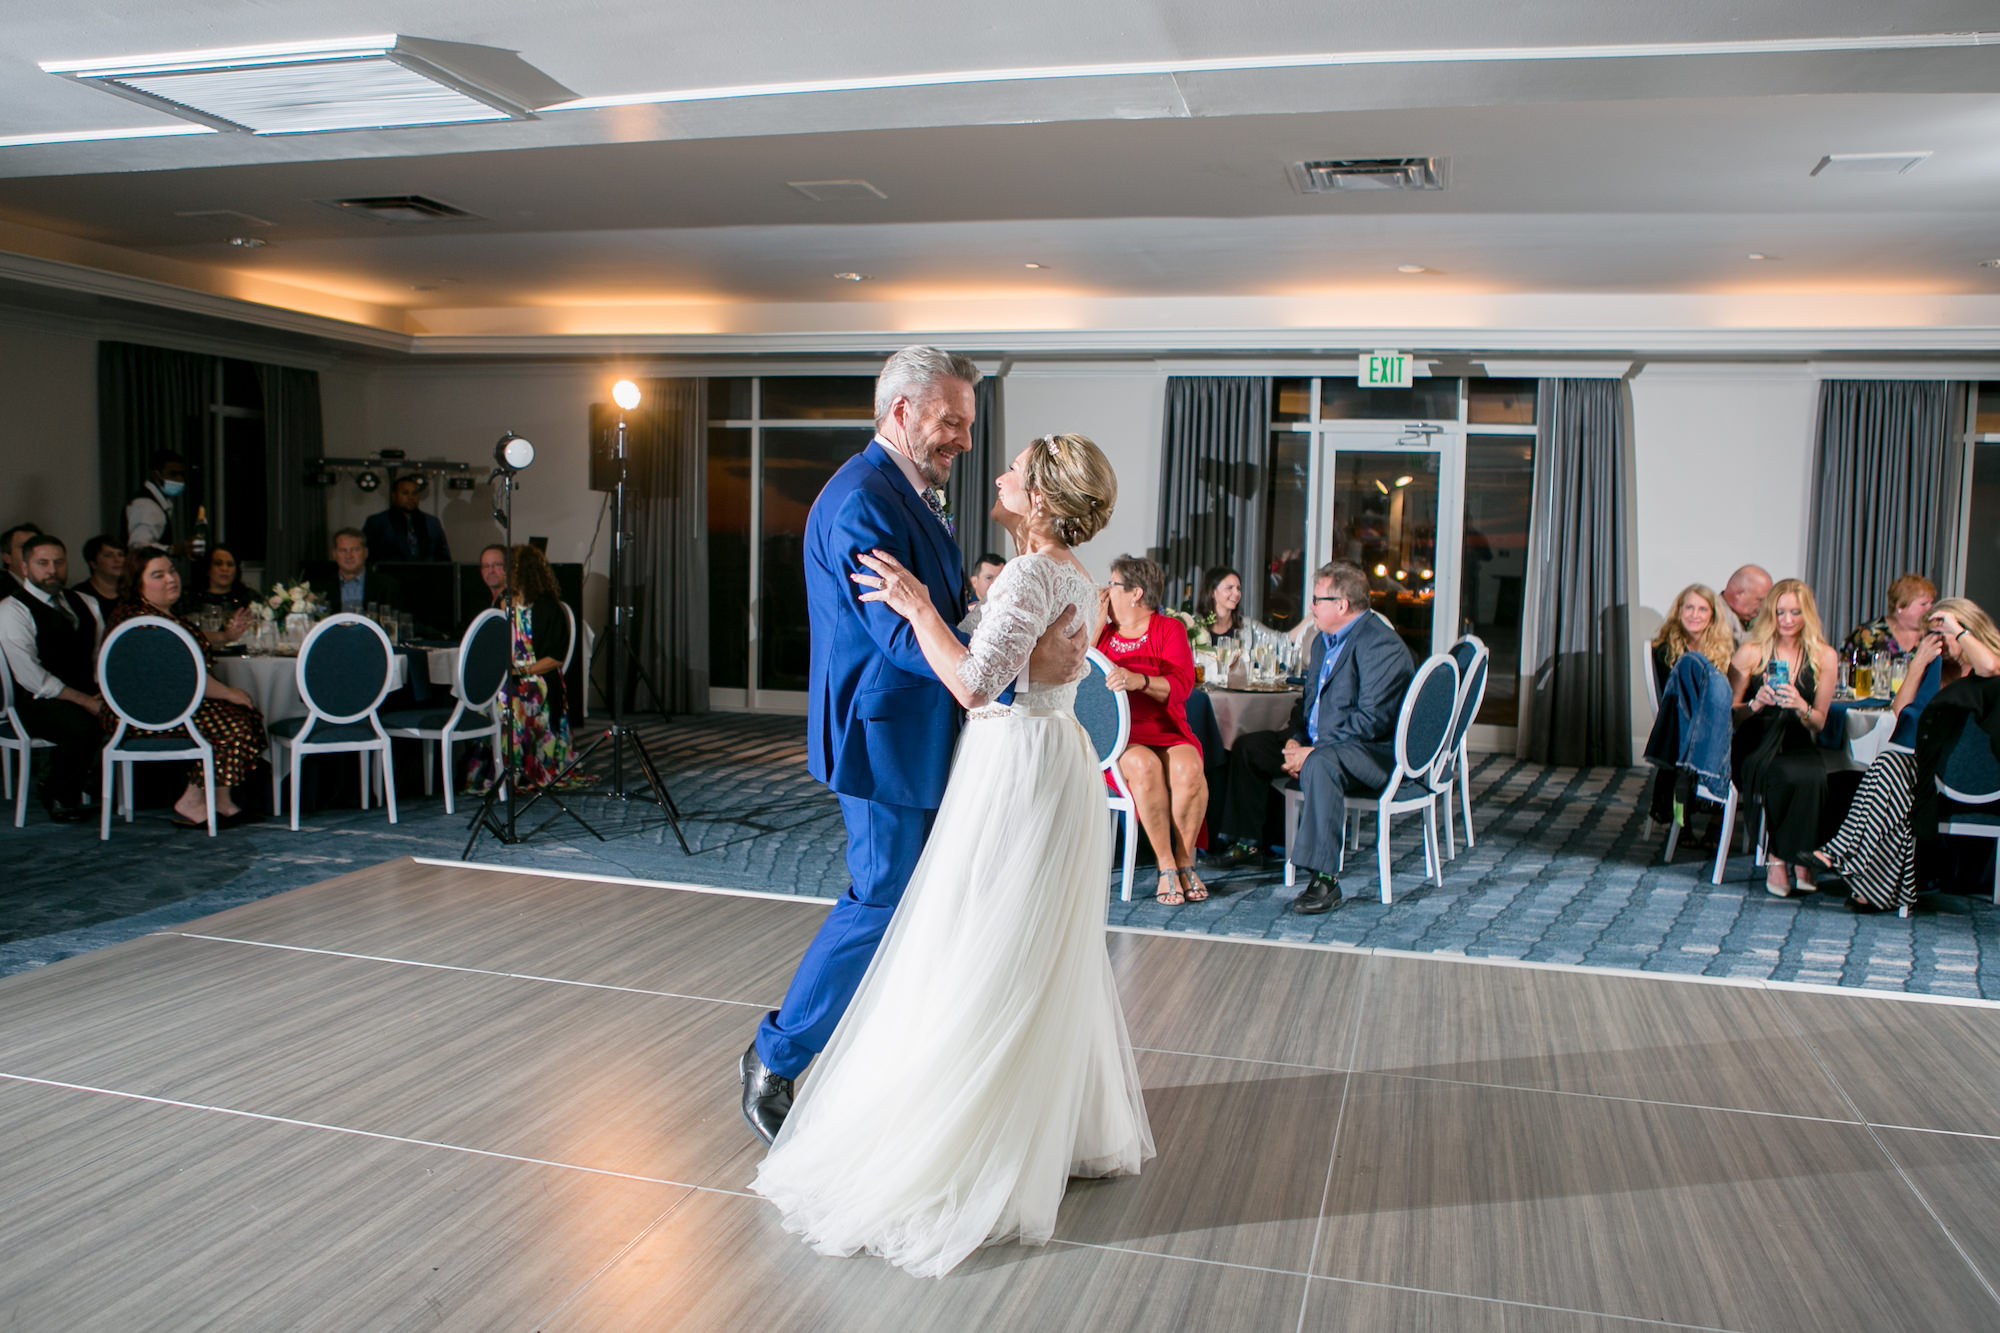 Classic Bride and Groom First Dance Wedding Reception Portrait | Tampa Bay Wedding Photographer Carrie Wildes Photography | St. Pete Wedding DJ Breezin' Entertainment